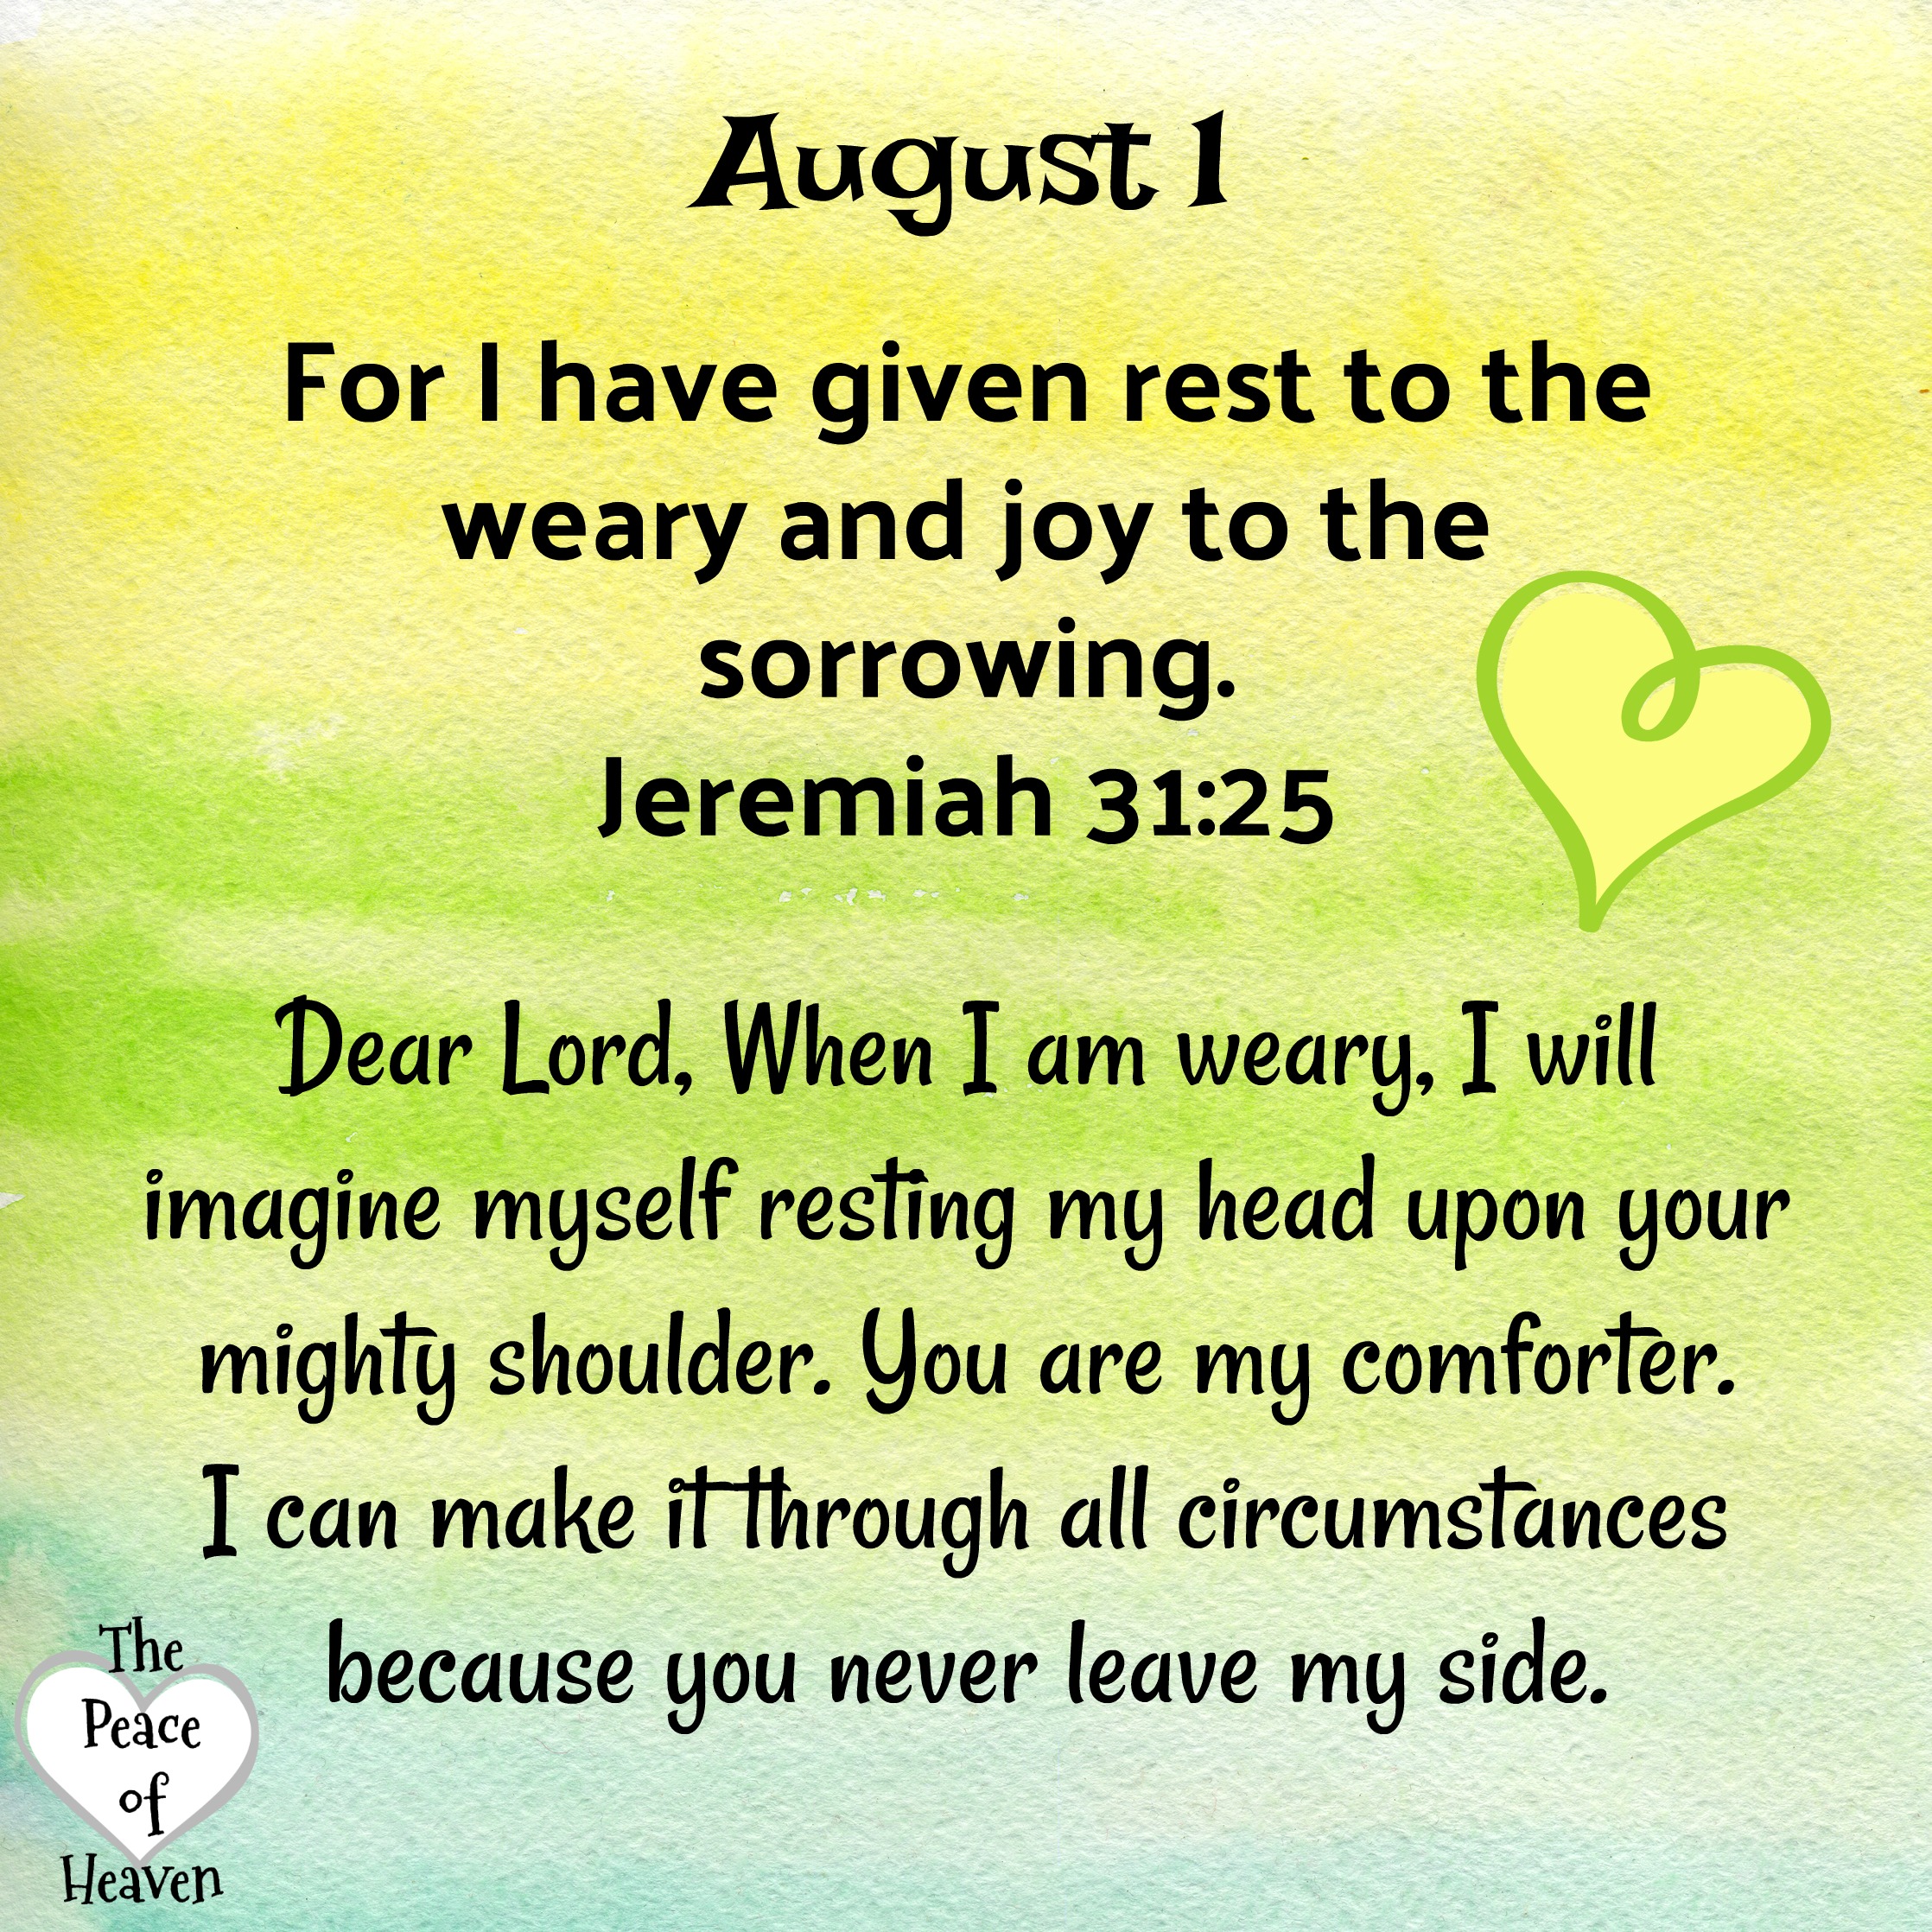 August 1 The Peace of Heaven